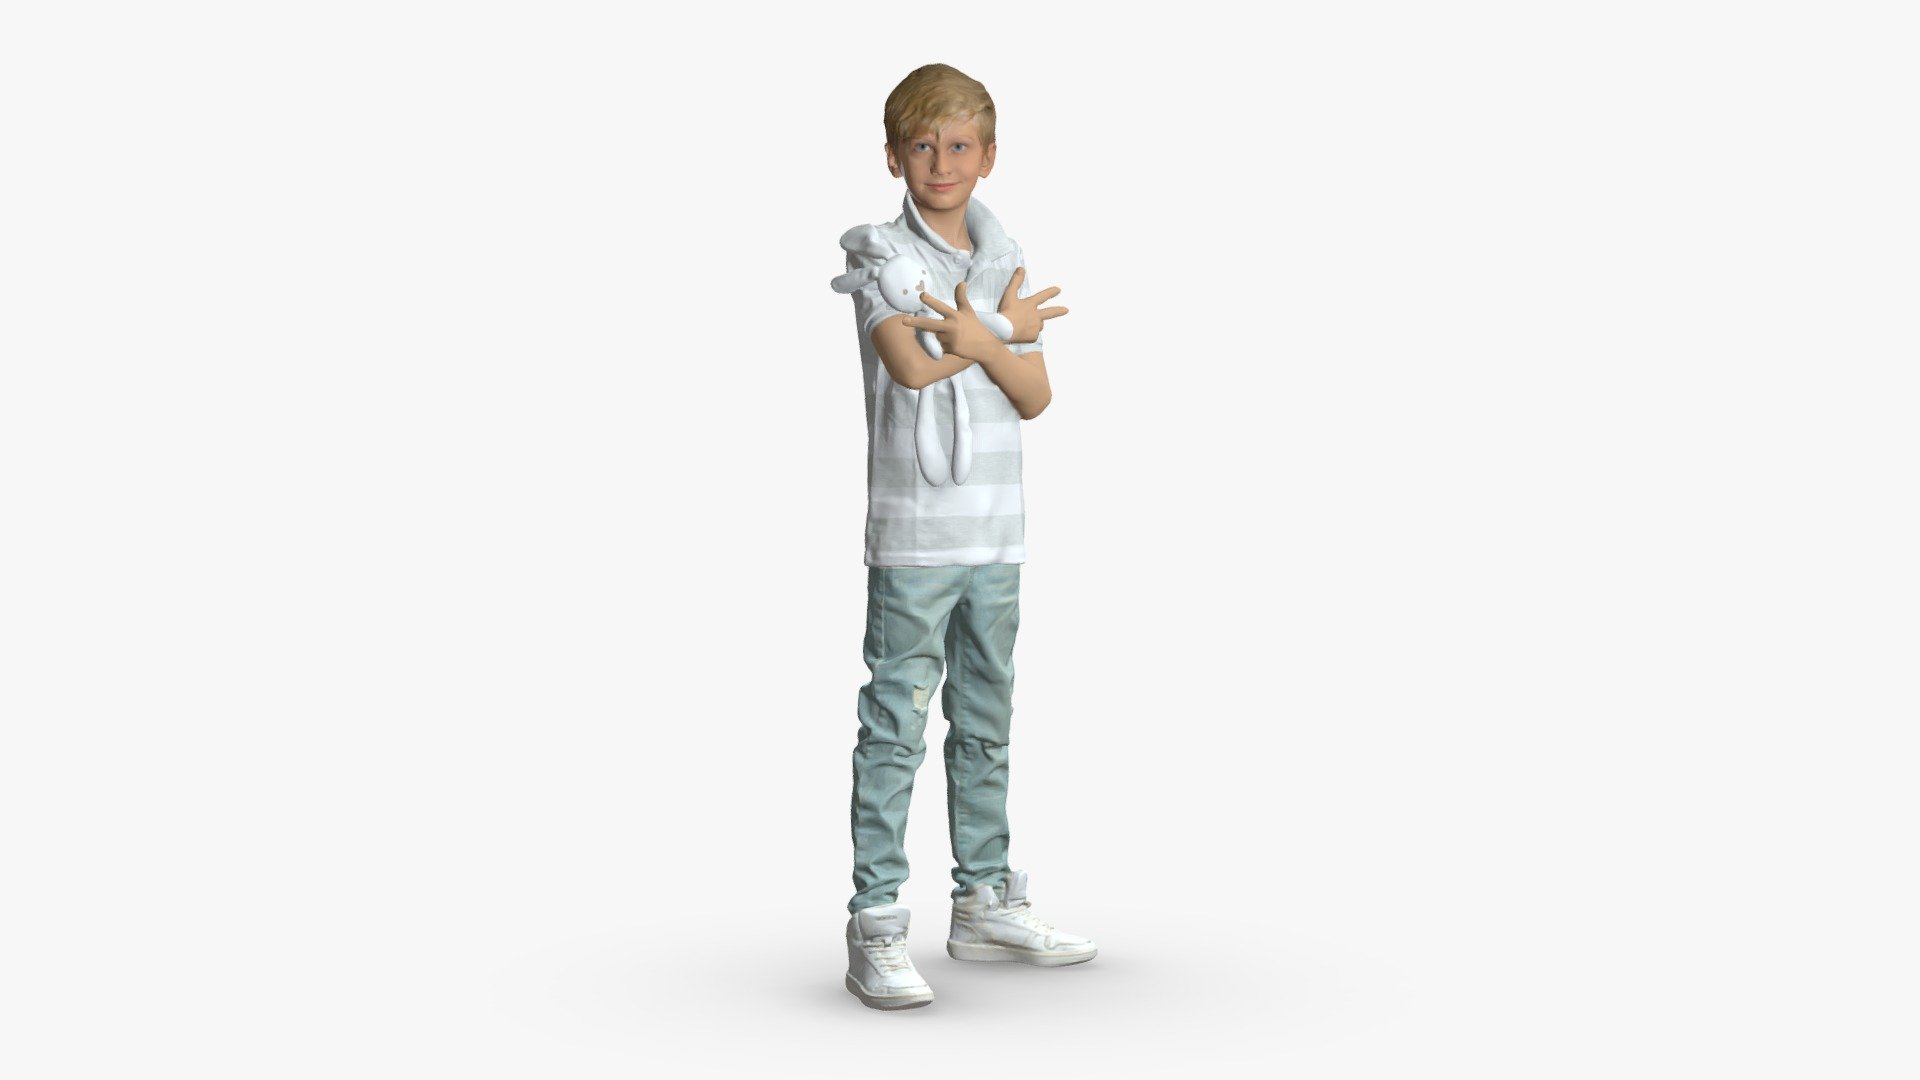 This 3D scanned model depicts a boy with light hair wearing a light striped shirt, light jeans, and white sneakers. His arms are crossed on his chest, and he is holding a soft toy rabbit in his hands.
The model is highly detailed and has a high resolution, allowing for every small detail in the boy's clothing and the toy rabbit to be examined, including textures.

Main features:

high-end realistic 3d scanned model;
realistic proportions;
highest quality;
low price;

FEATURES

3d scanned model
high resolution textures
real-world scale - 001513 - Cross-Armed Boy with Soft Toy Rabbit - Buy Royalty Free 3D model by 3DFarm 3d model